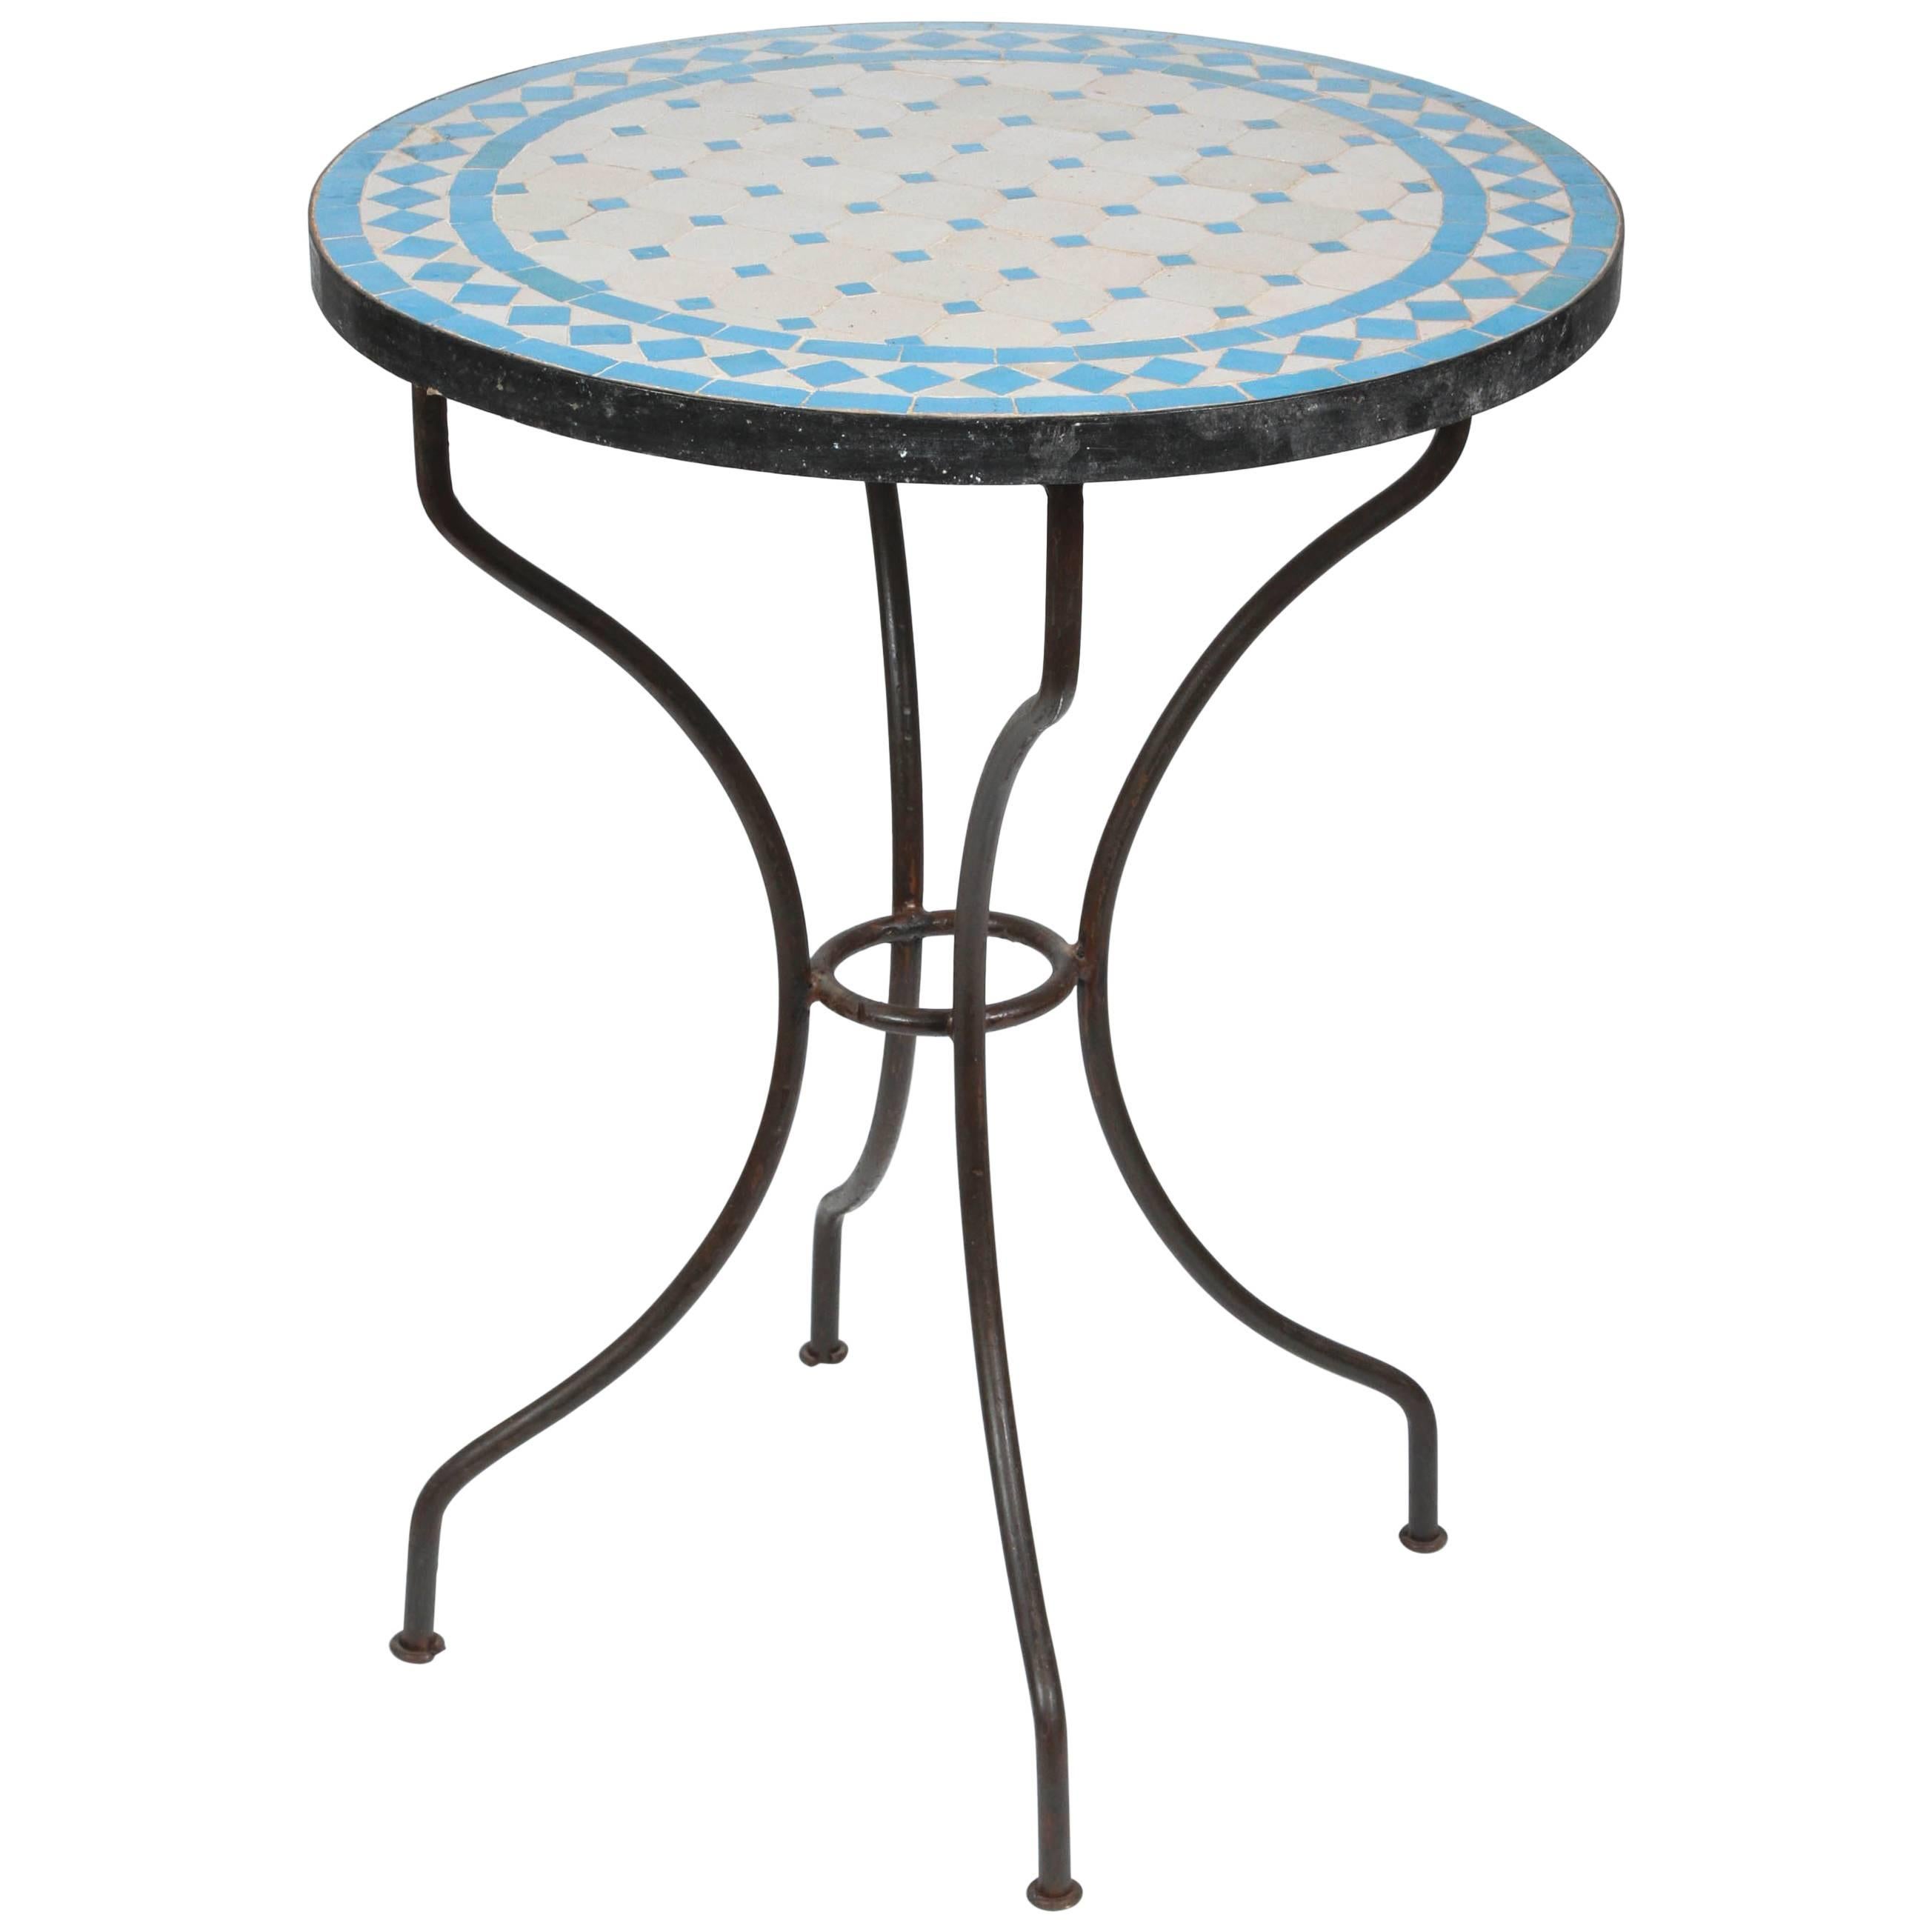 Moroccan Mosaic Blue Tile Bistro Table on Iron Base